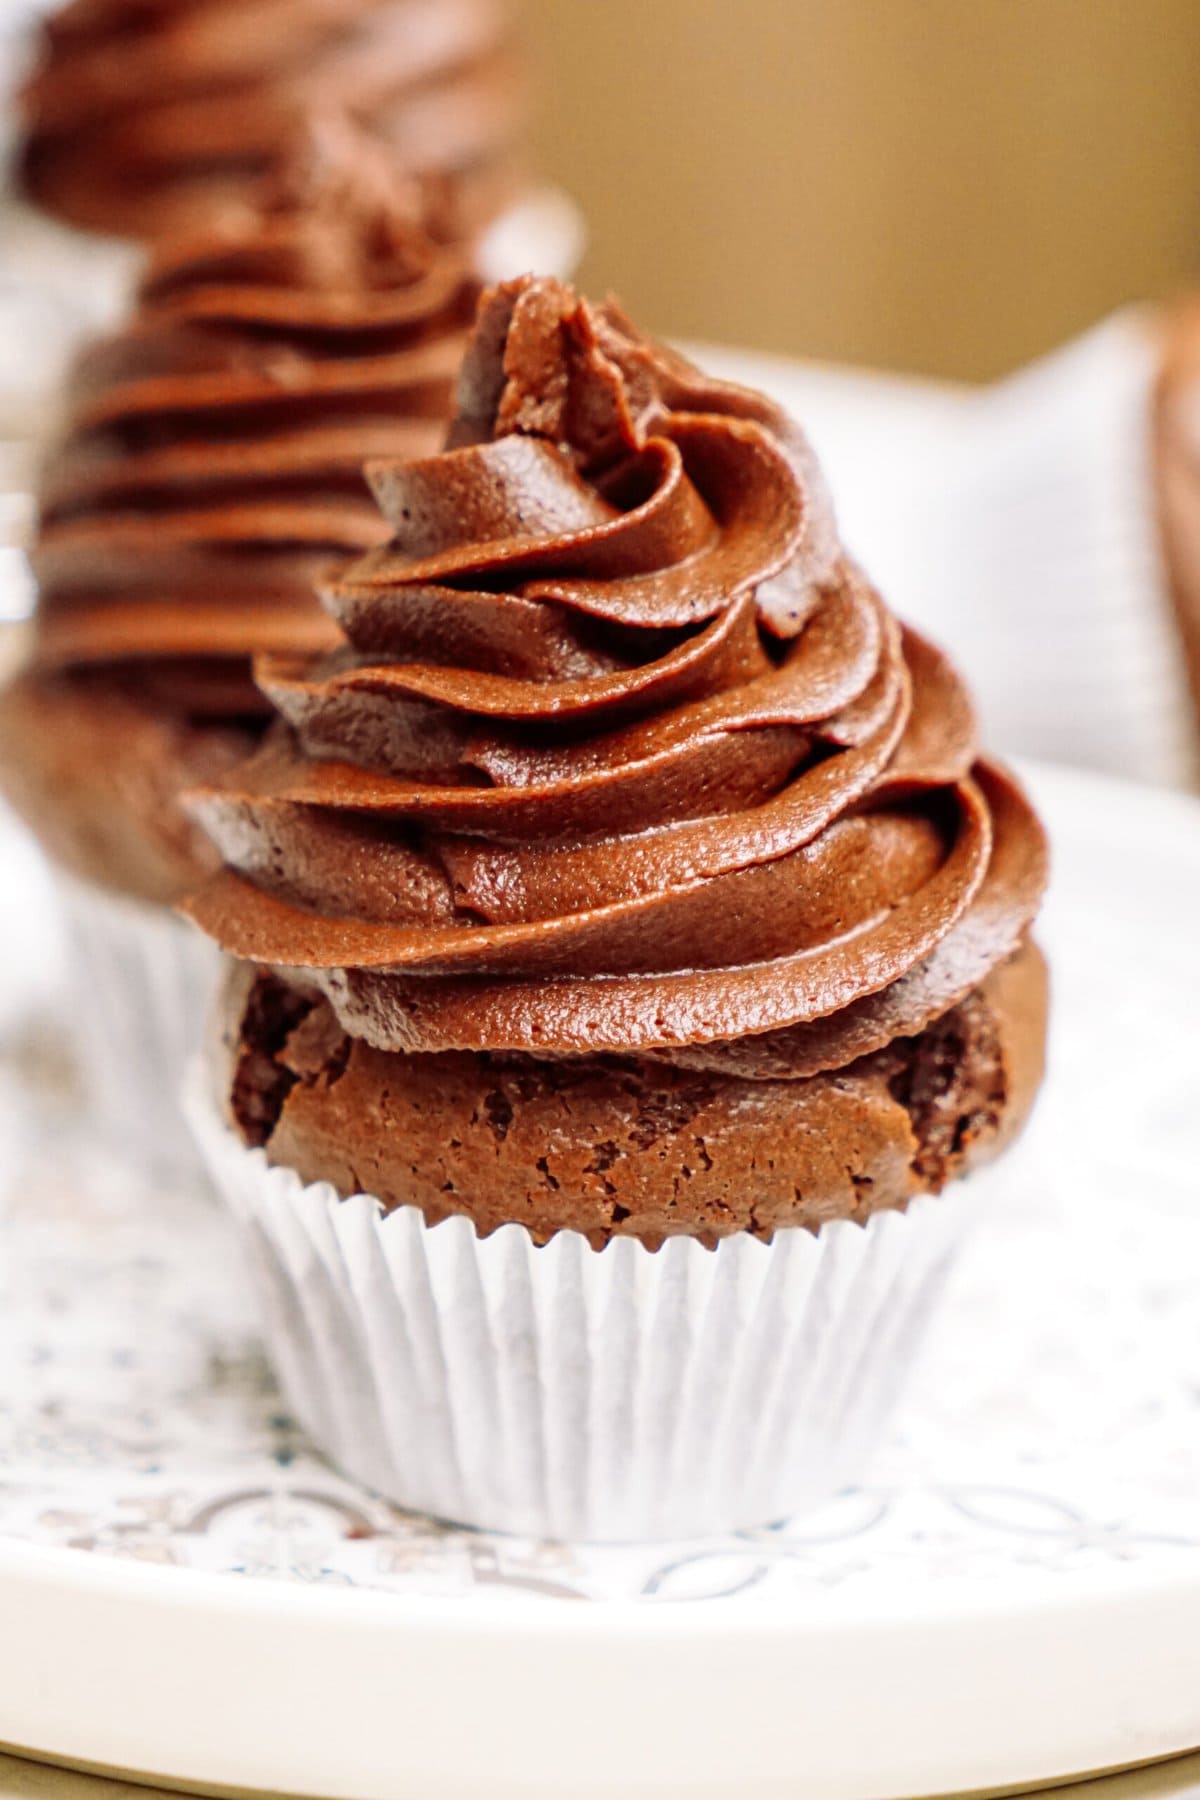 A chocolate cupcake with a swirl of chocolate frosting on a plate with a floral pattern.